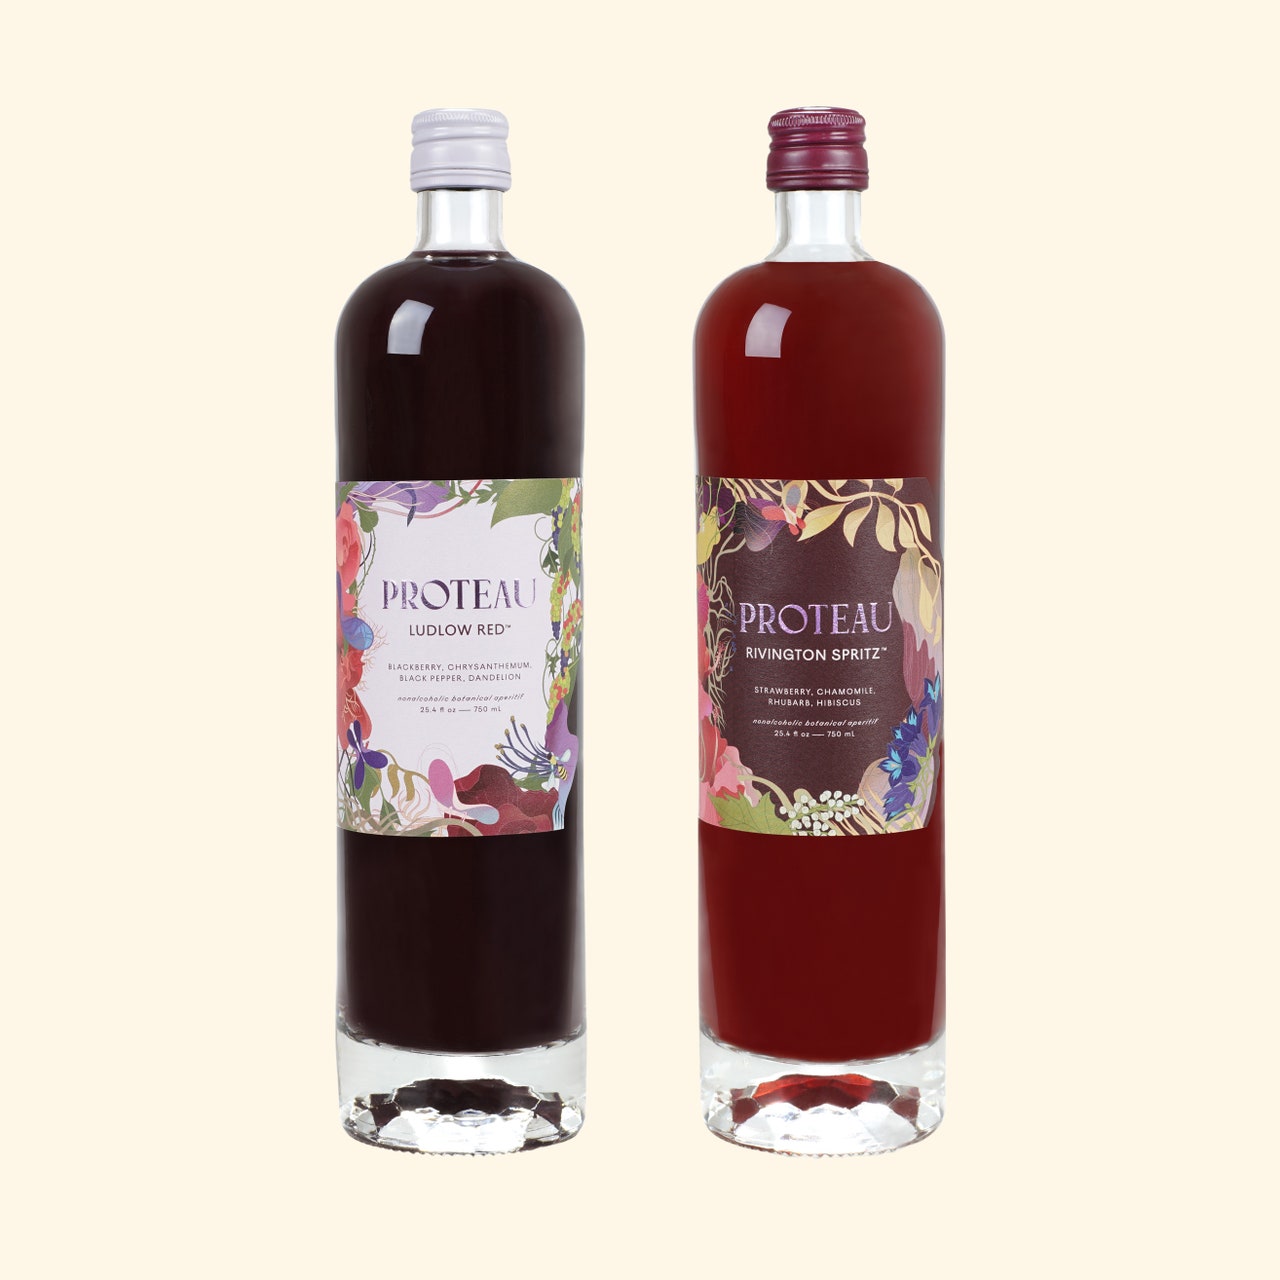 Two bottles of Proteau spirits